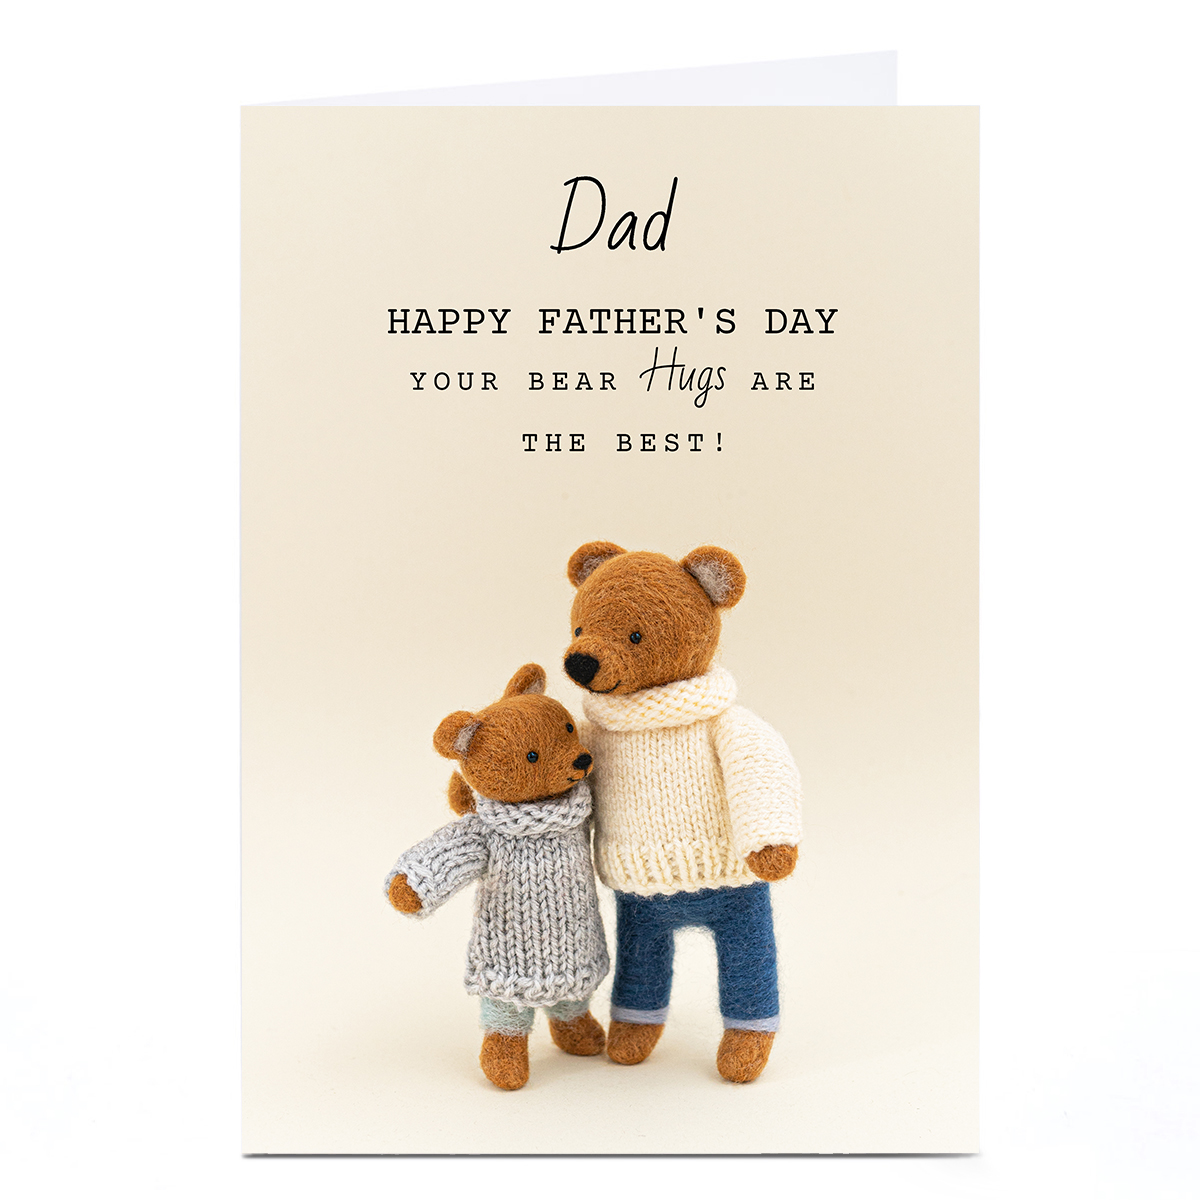 Personalised Lemon & Sugar Father's Day Card - Your Bear Hugs Are The Best